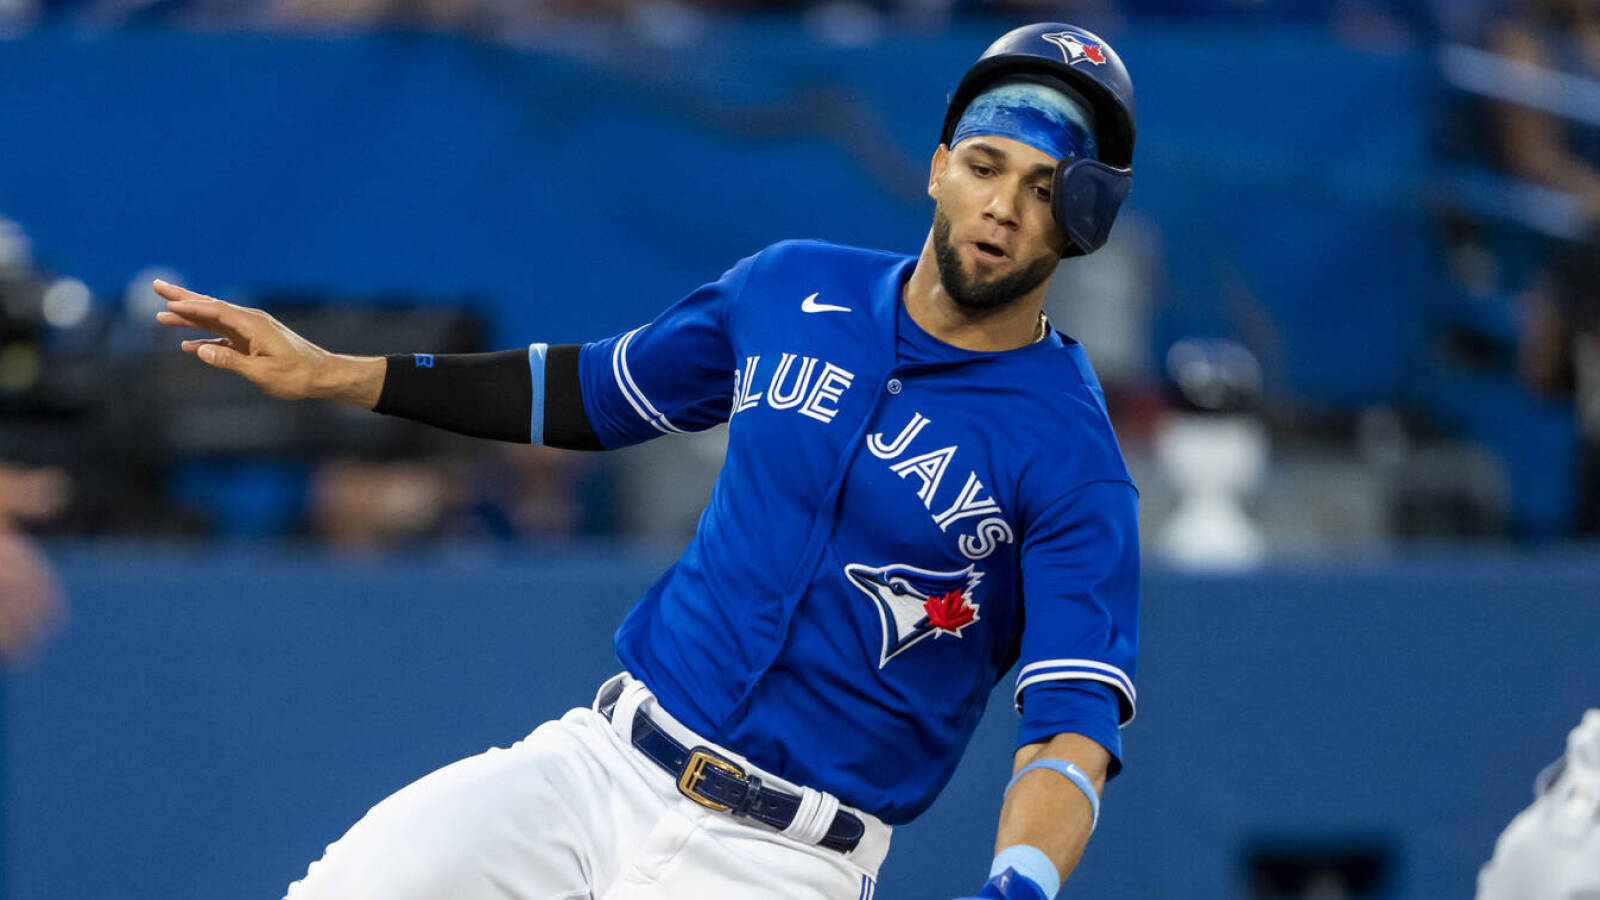 Blue Jays Lourdes Gurriel Jr. has found what works as MLB's hottest hitter  - Sports Illustrated Toronto Blue Jays News, Analysis and More